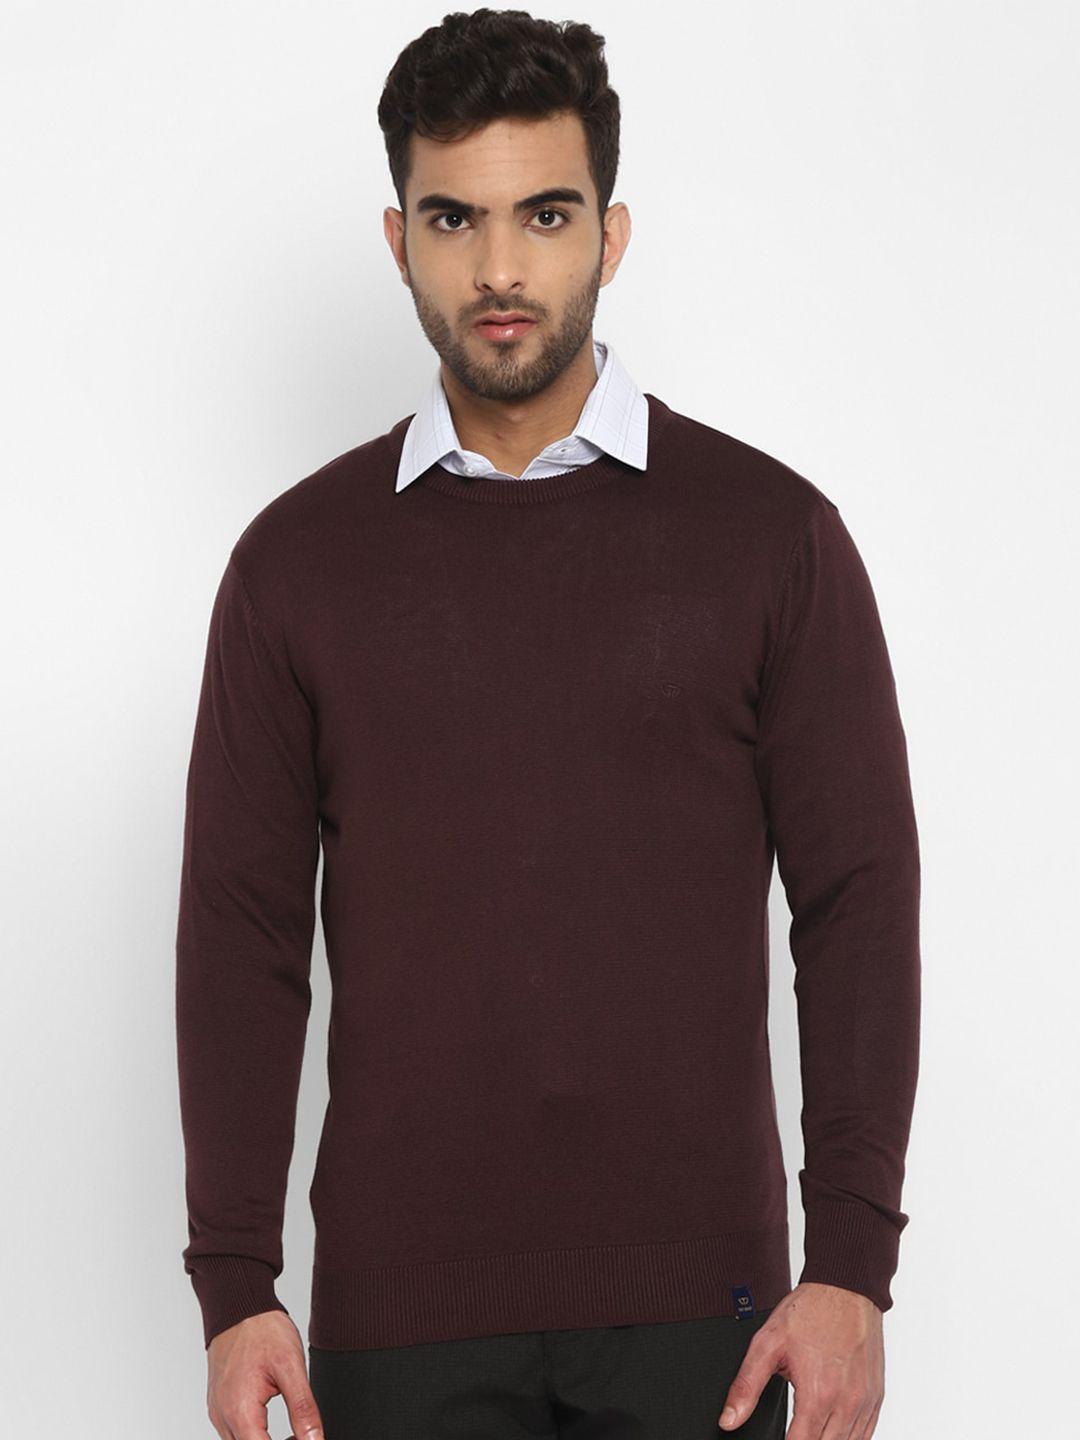 top brass wool pullover sweater